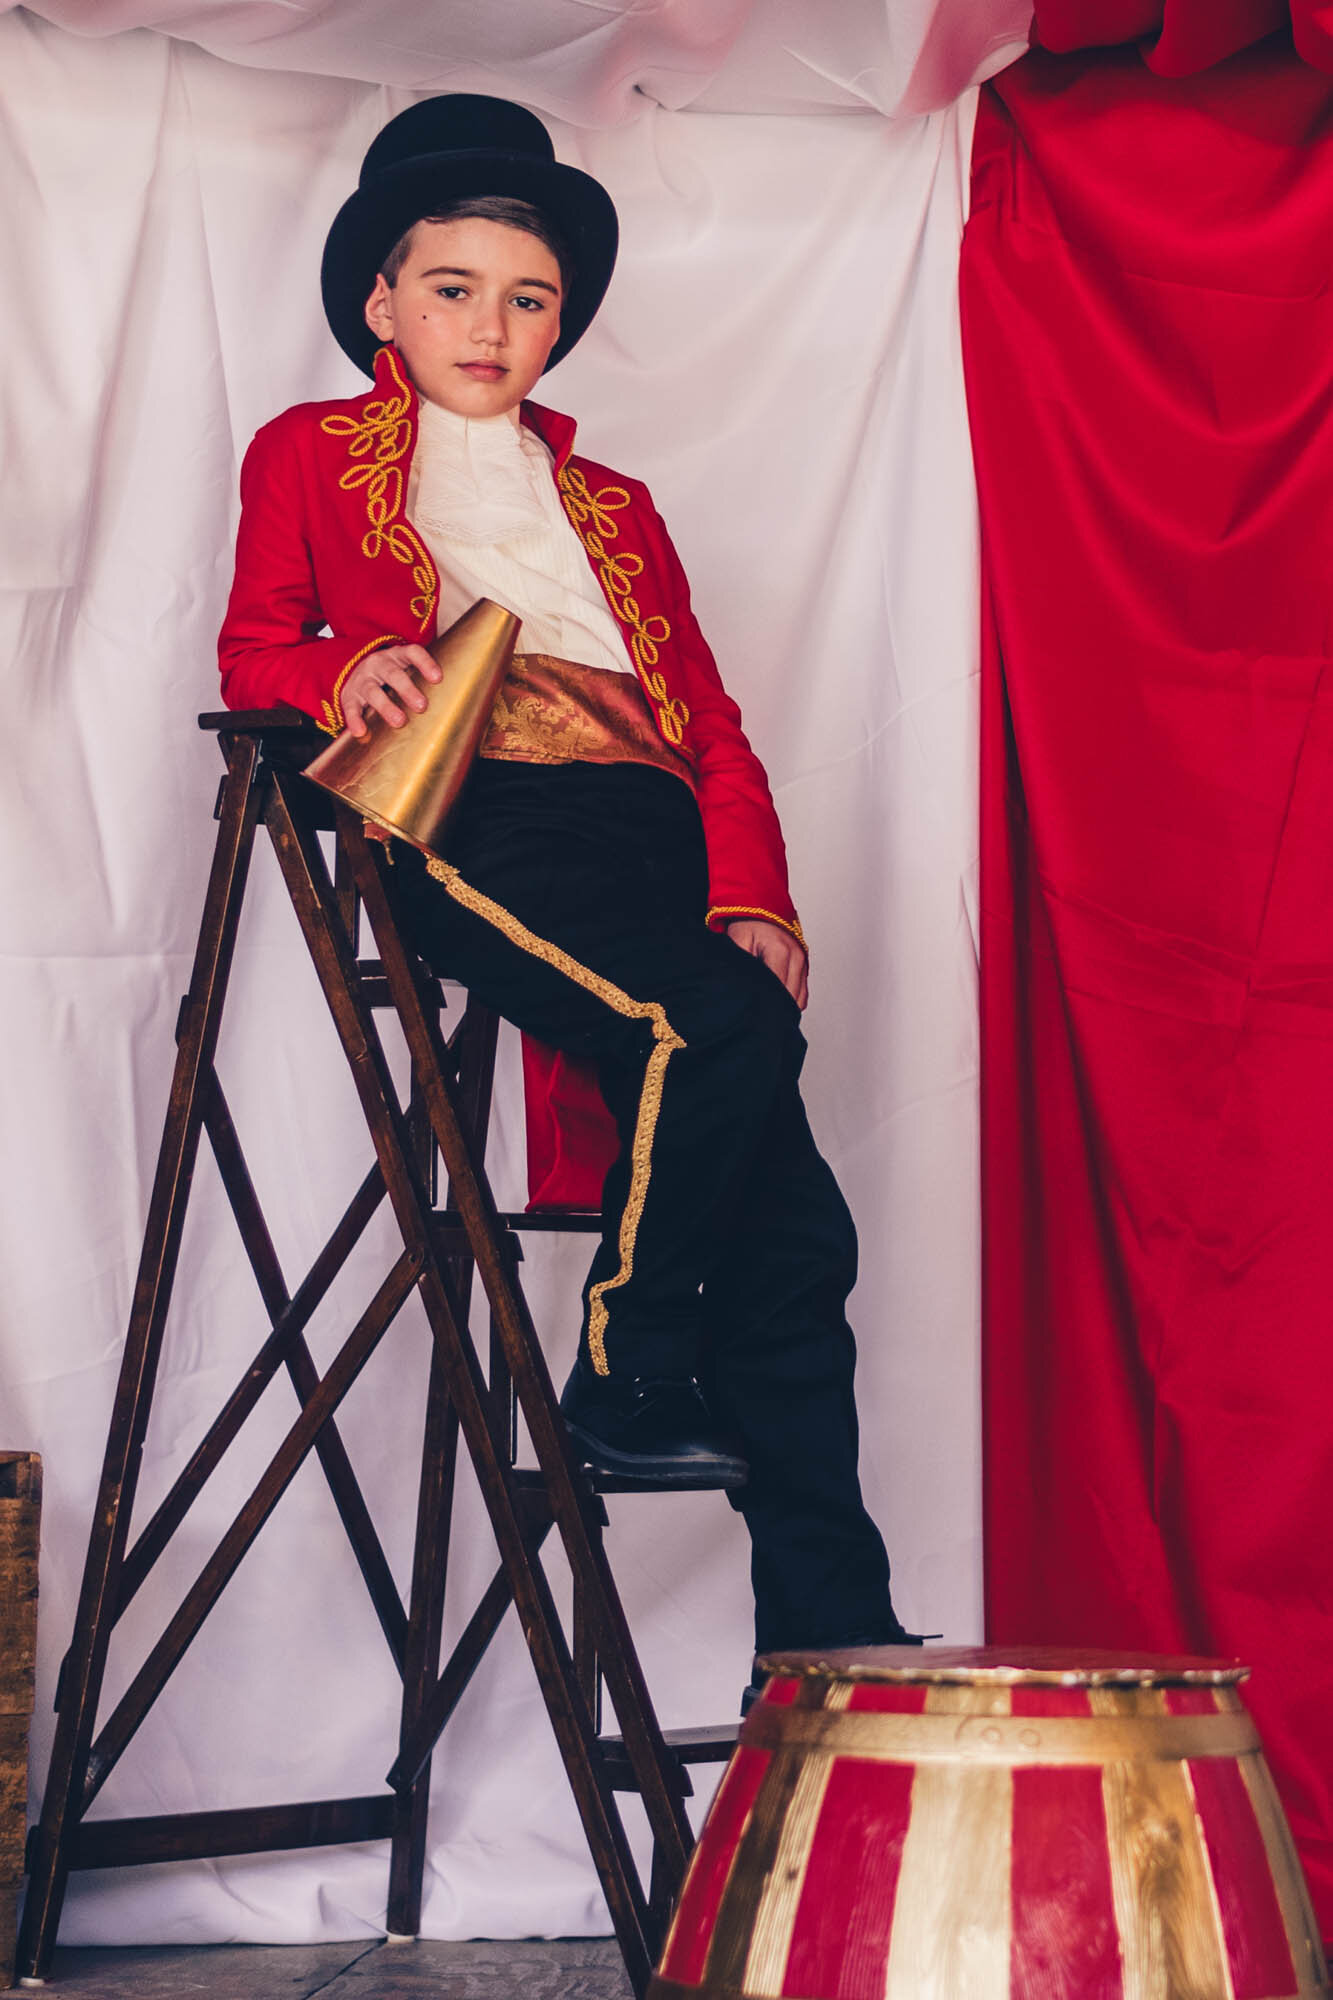 Kids Circus Ringmaster Costume - JACKET, TROUSERS and TOP HAT